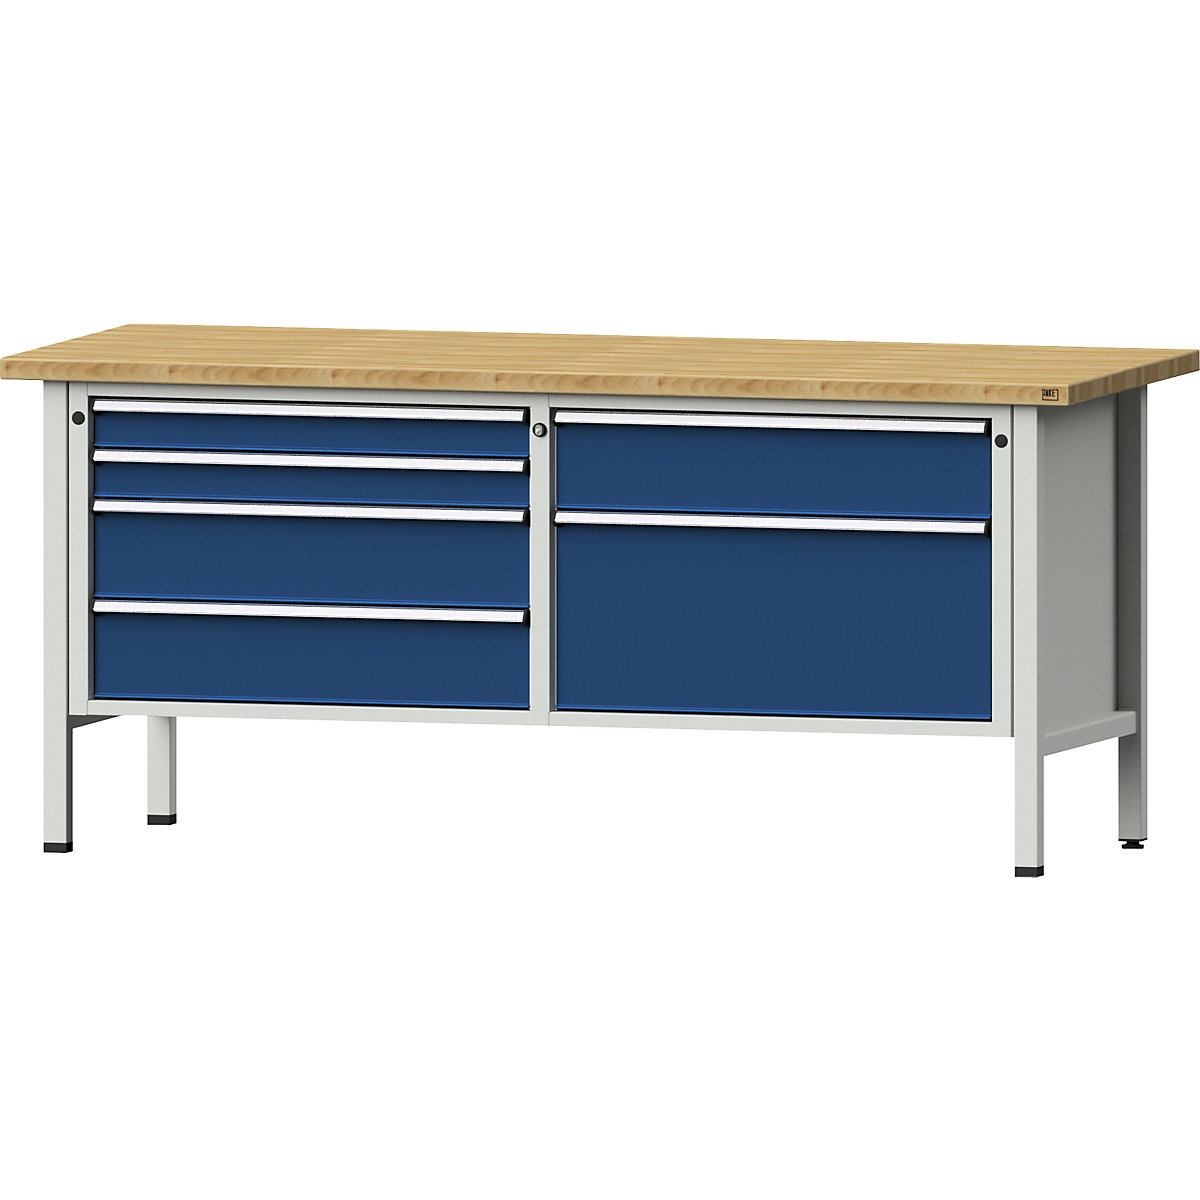 Workbenches 2000 mm wide, frame construction - ANKE